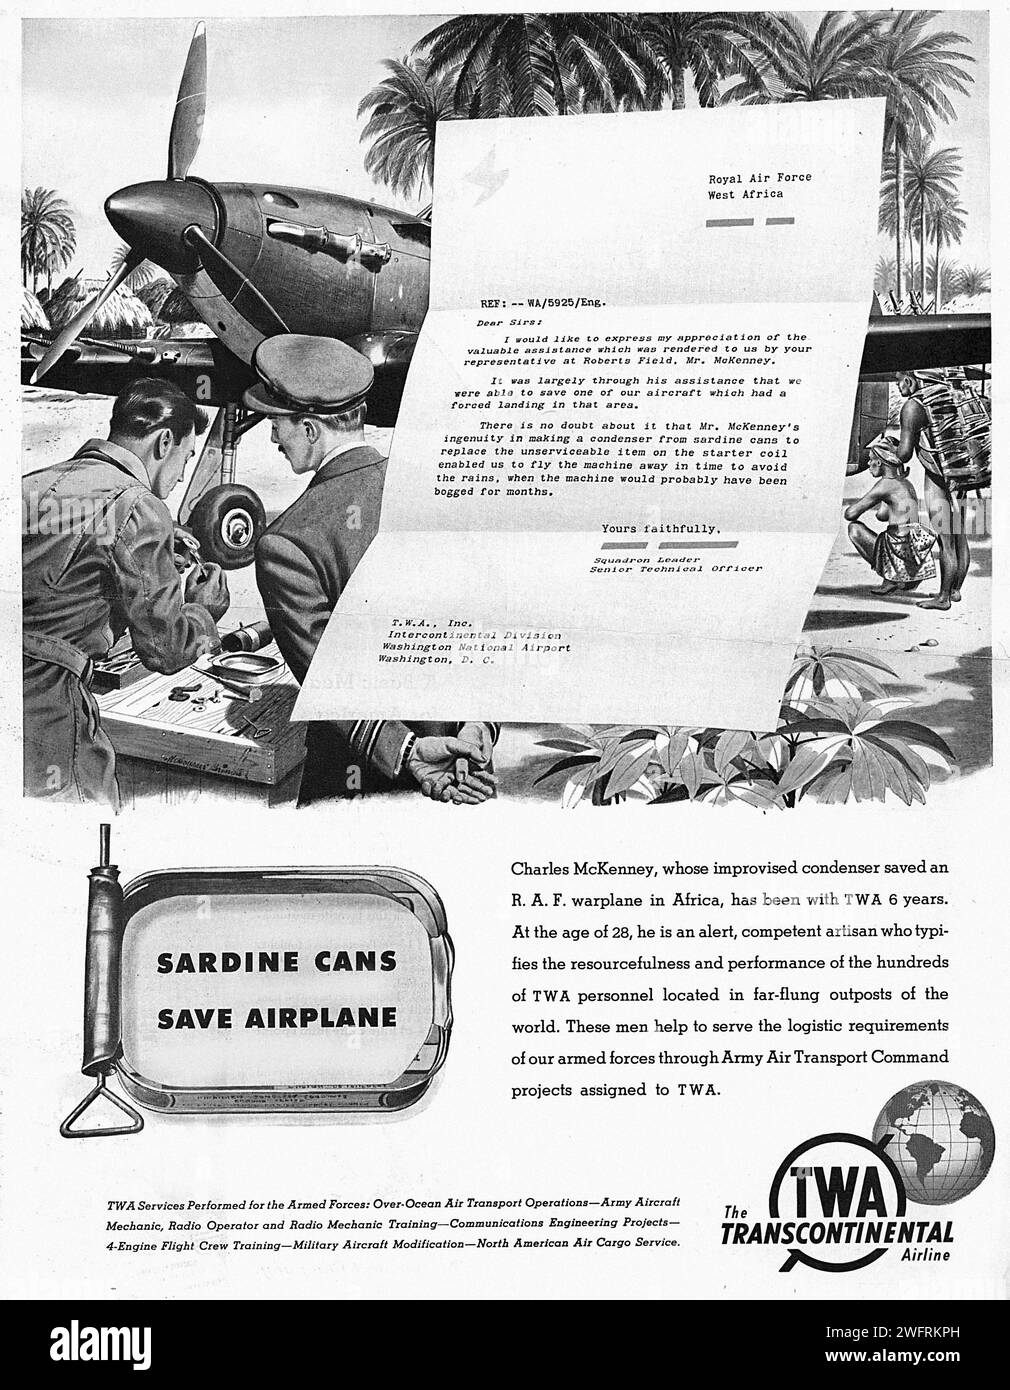 “SARDINE CANS SAVE AIRPLANE” “Charles McHenry, whose improved condenser saved an R.A.F. warplane in Africa, has been with TWA 6 years. He is the only American located at the far-flung outposts of the TWA personnel located in far-flung outposts of the world. These personnel are responsible for the maintenance of the fleet of aircraft assigned to TWA Army Air Transport Command projects.”  This is a black and white advertisement from the United States during World War II. The advertisement is for Transcontinental Airlines. The image shows a group of men in military uniforms gathered around a larg Stock Photo